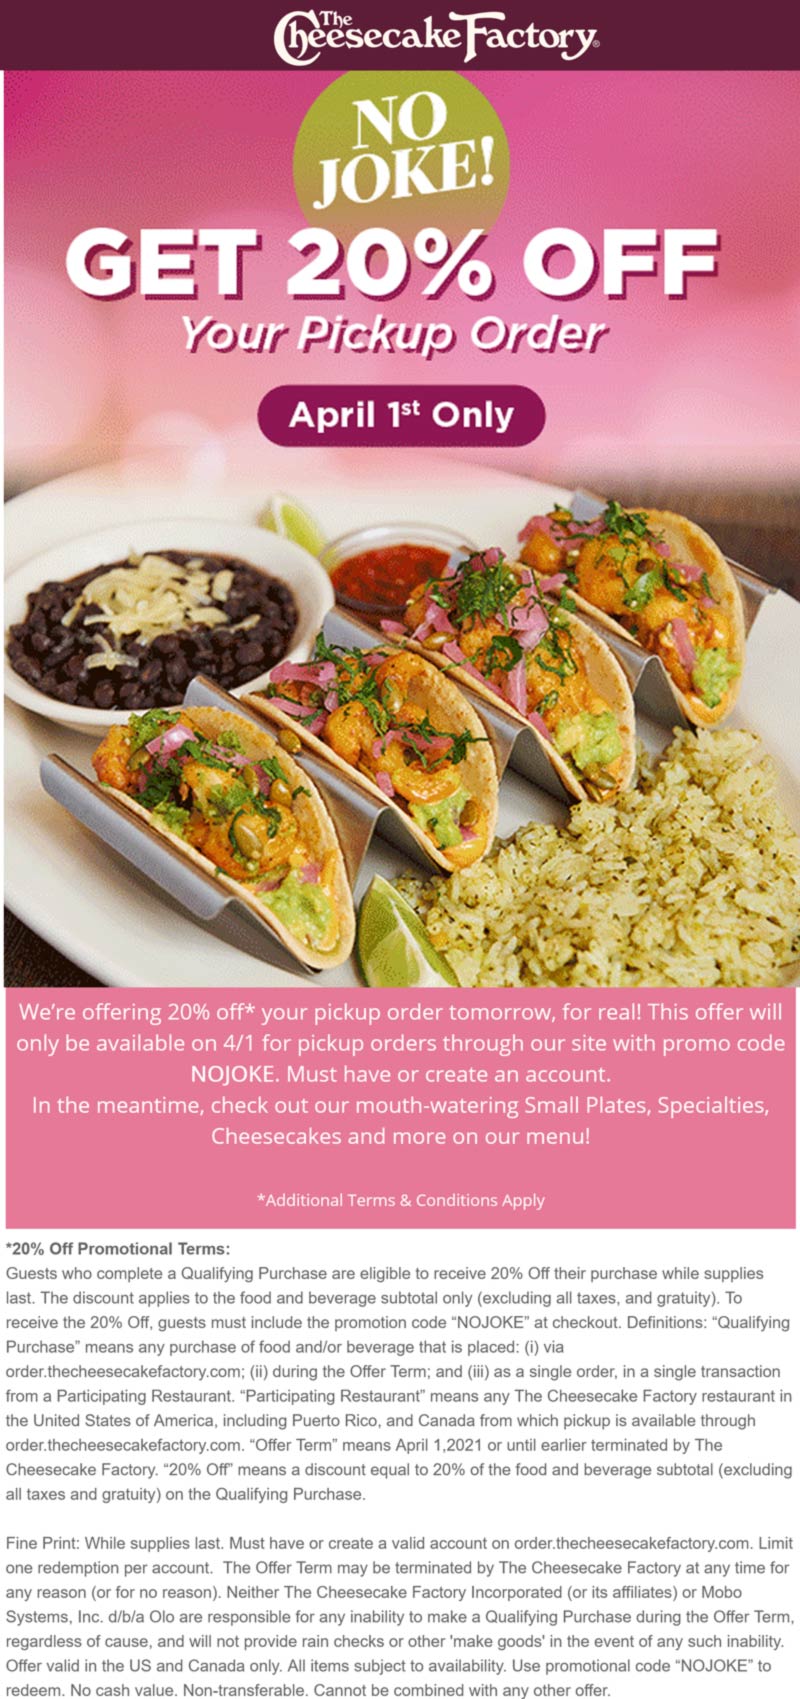 20 off pickup today at The Cheesecake Factory restaurants via promo